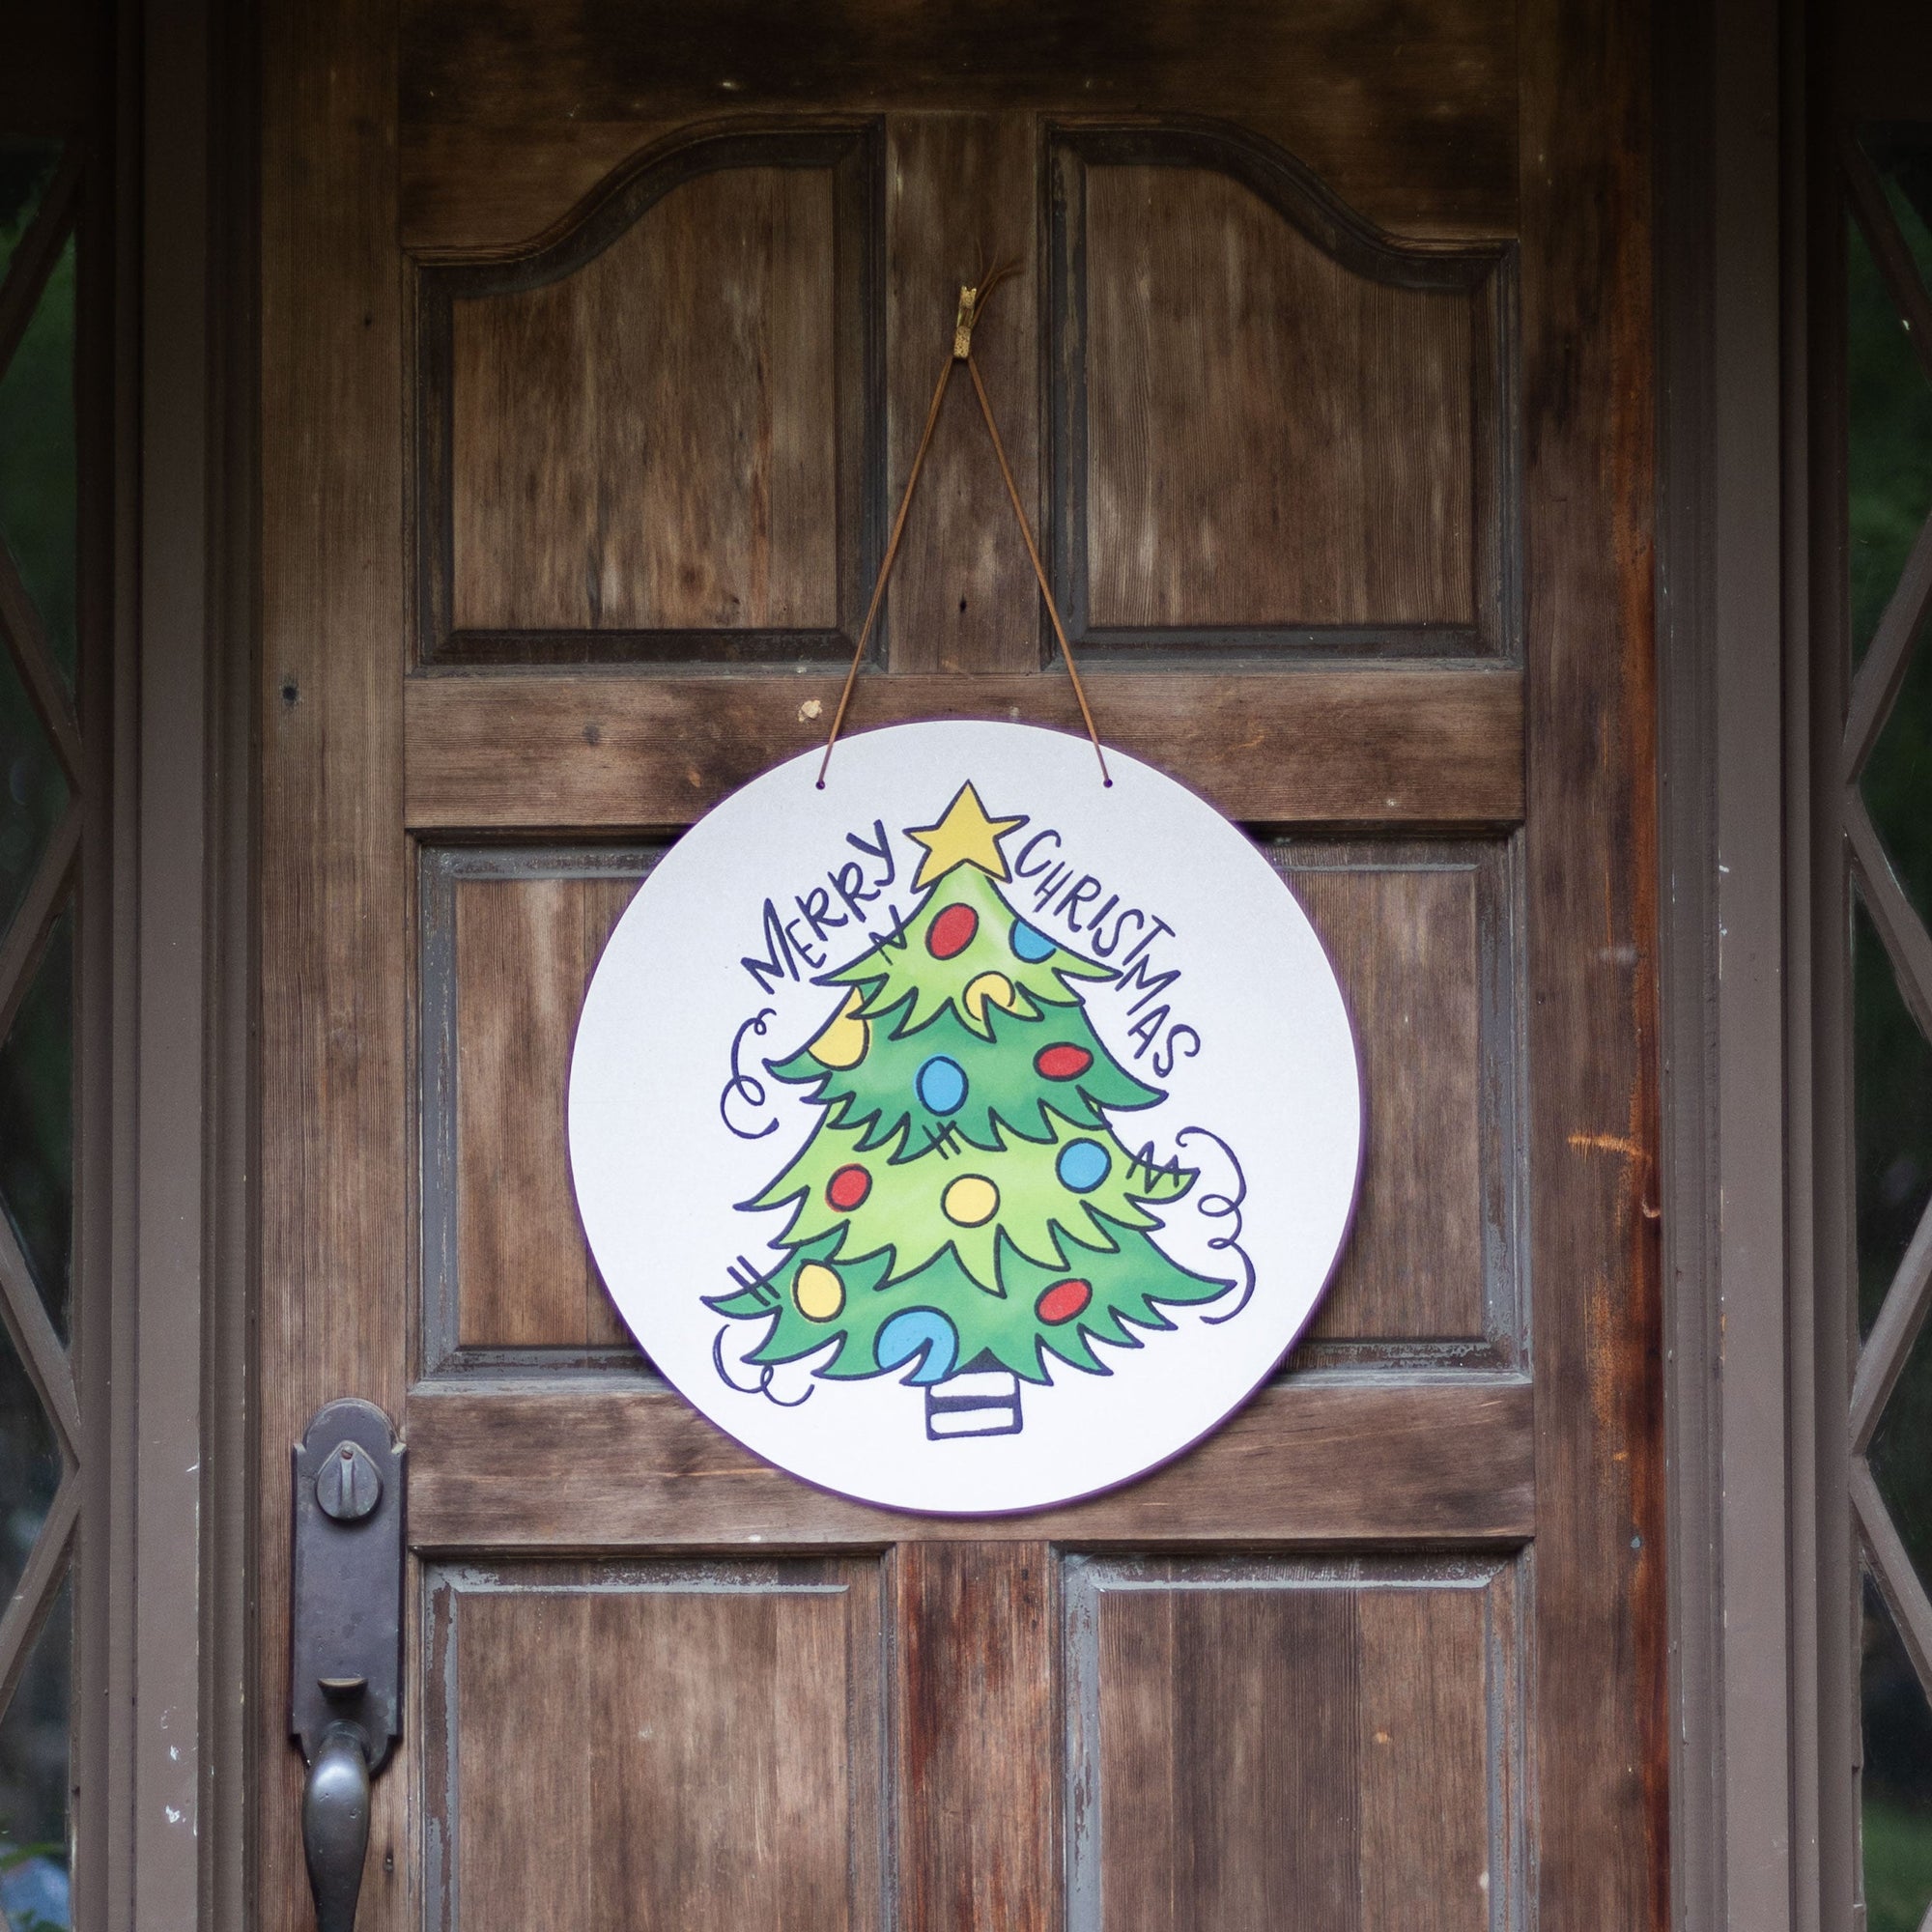 Front View. Christmas Door Hanger, Whimsy Tree Outdoor Ornament/Decor The WAREHOUSE Studio 